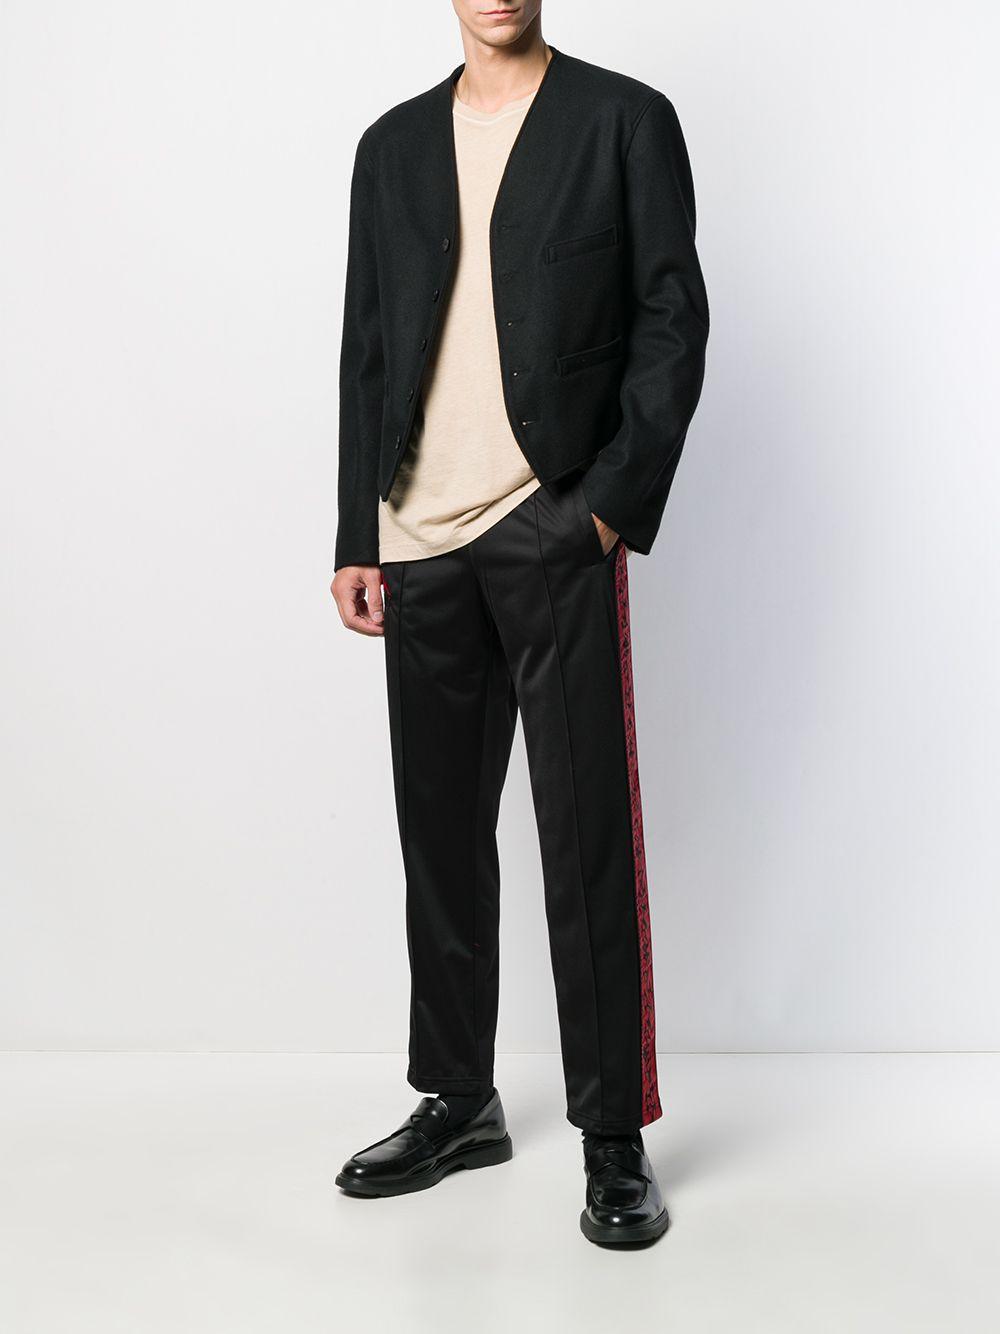 Lemaire Wool Fitted Knit Jacket in Black for Men - Lyst